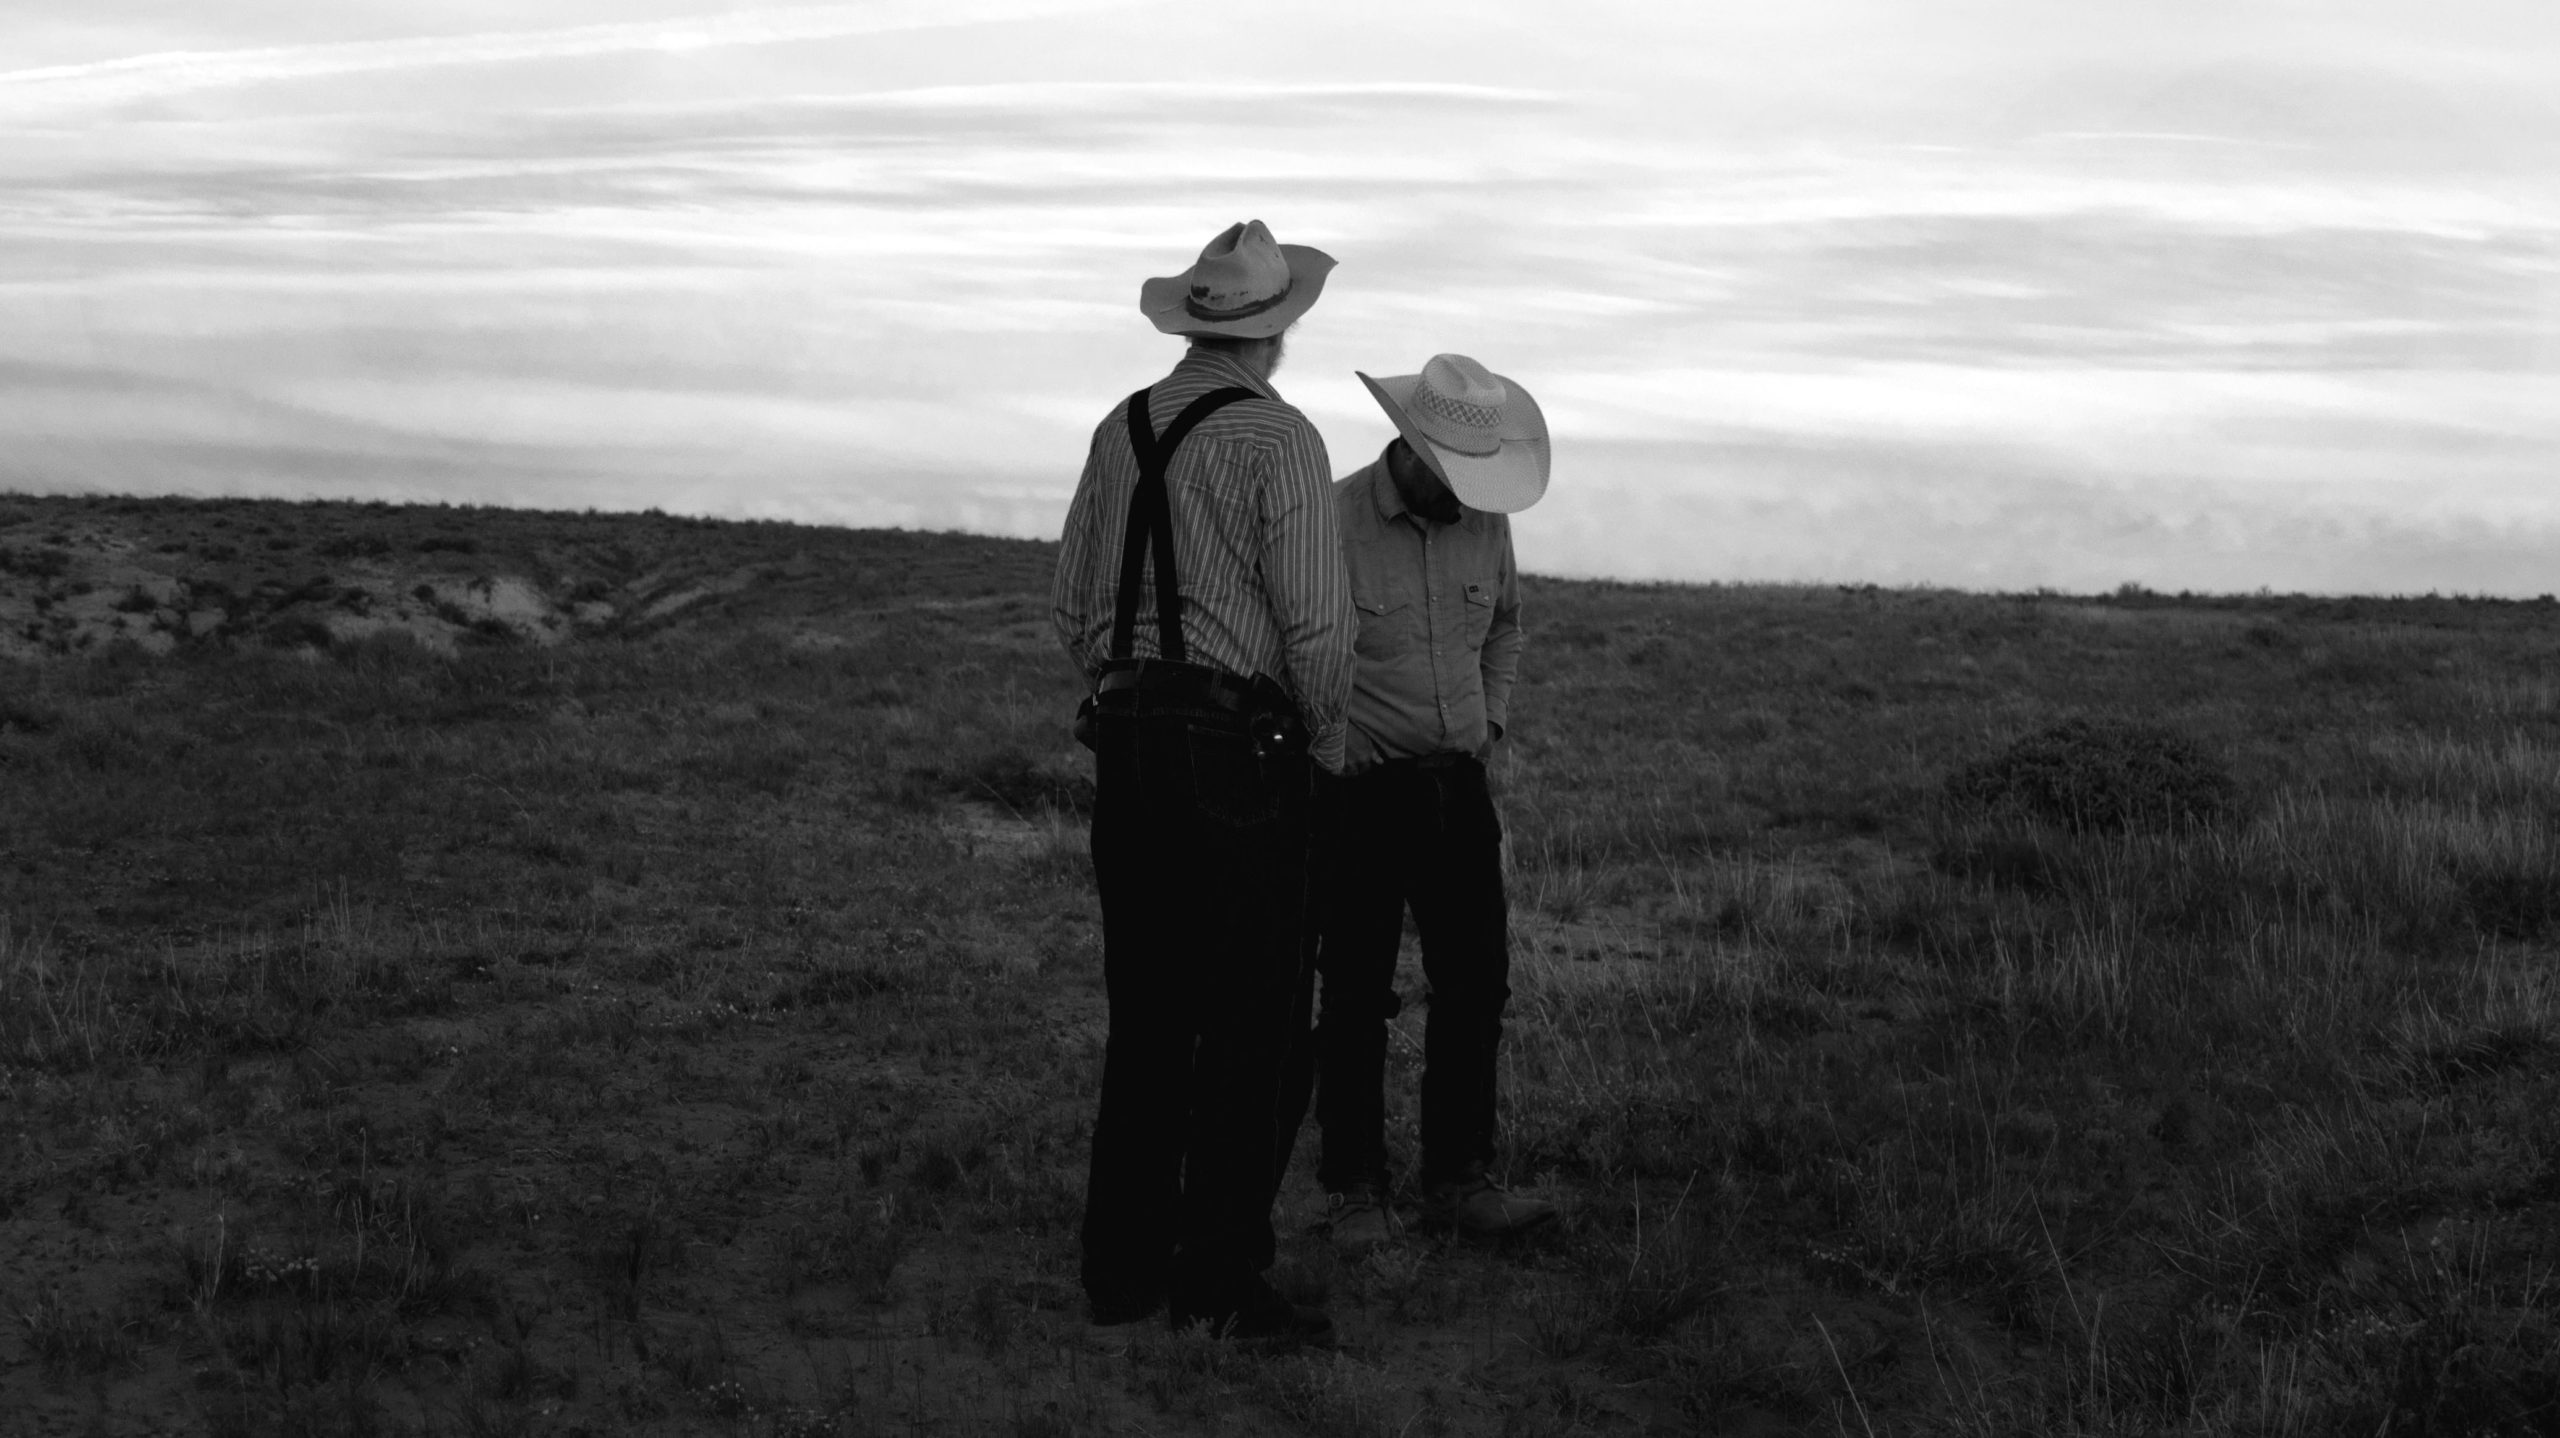 Two old cowboys standing and talking where the ordinary becomes iconic